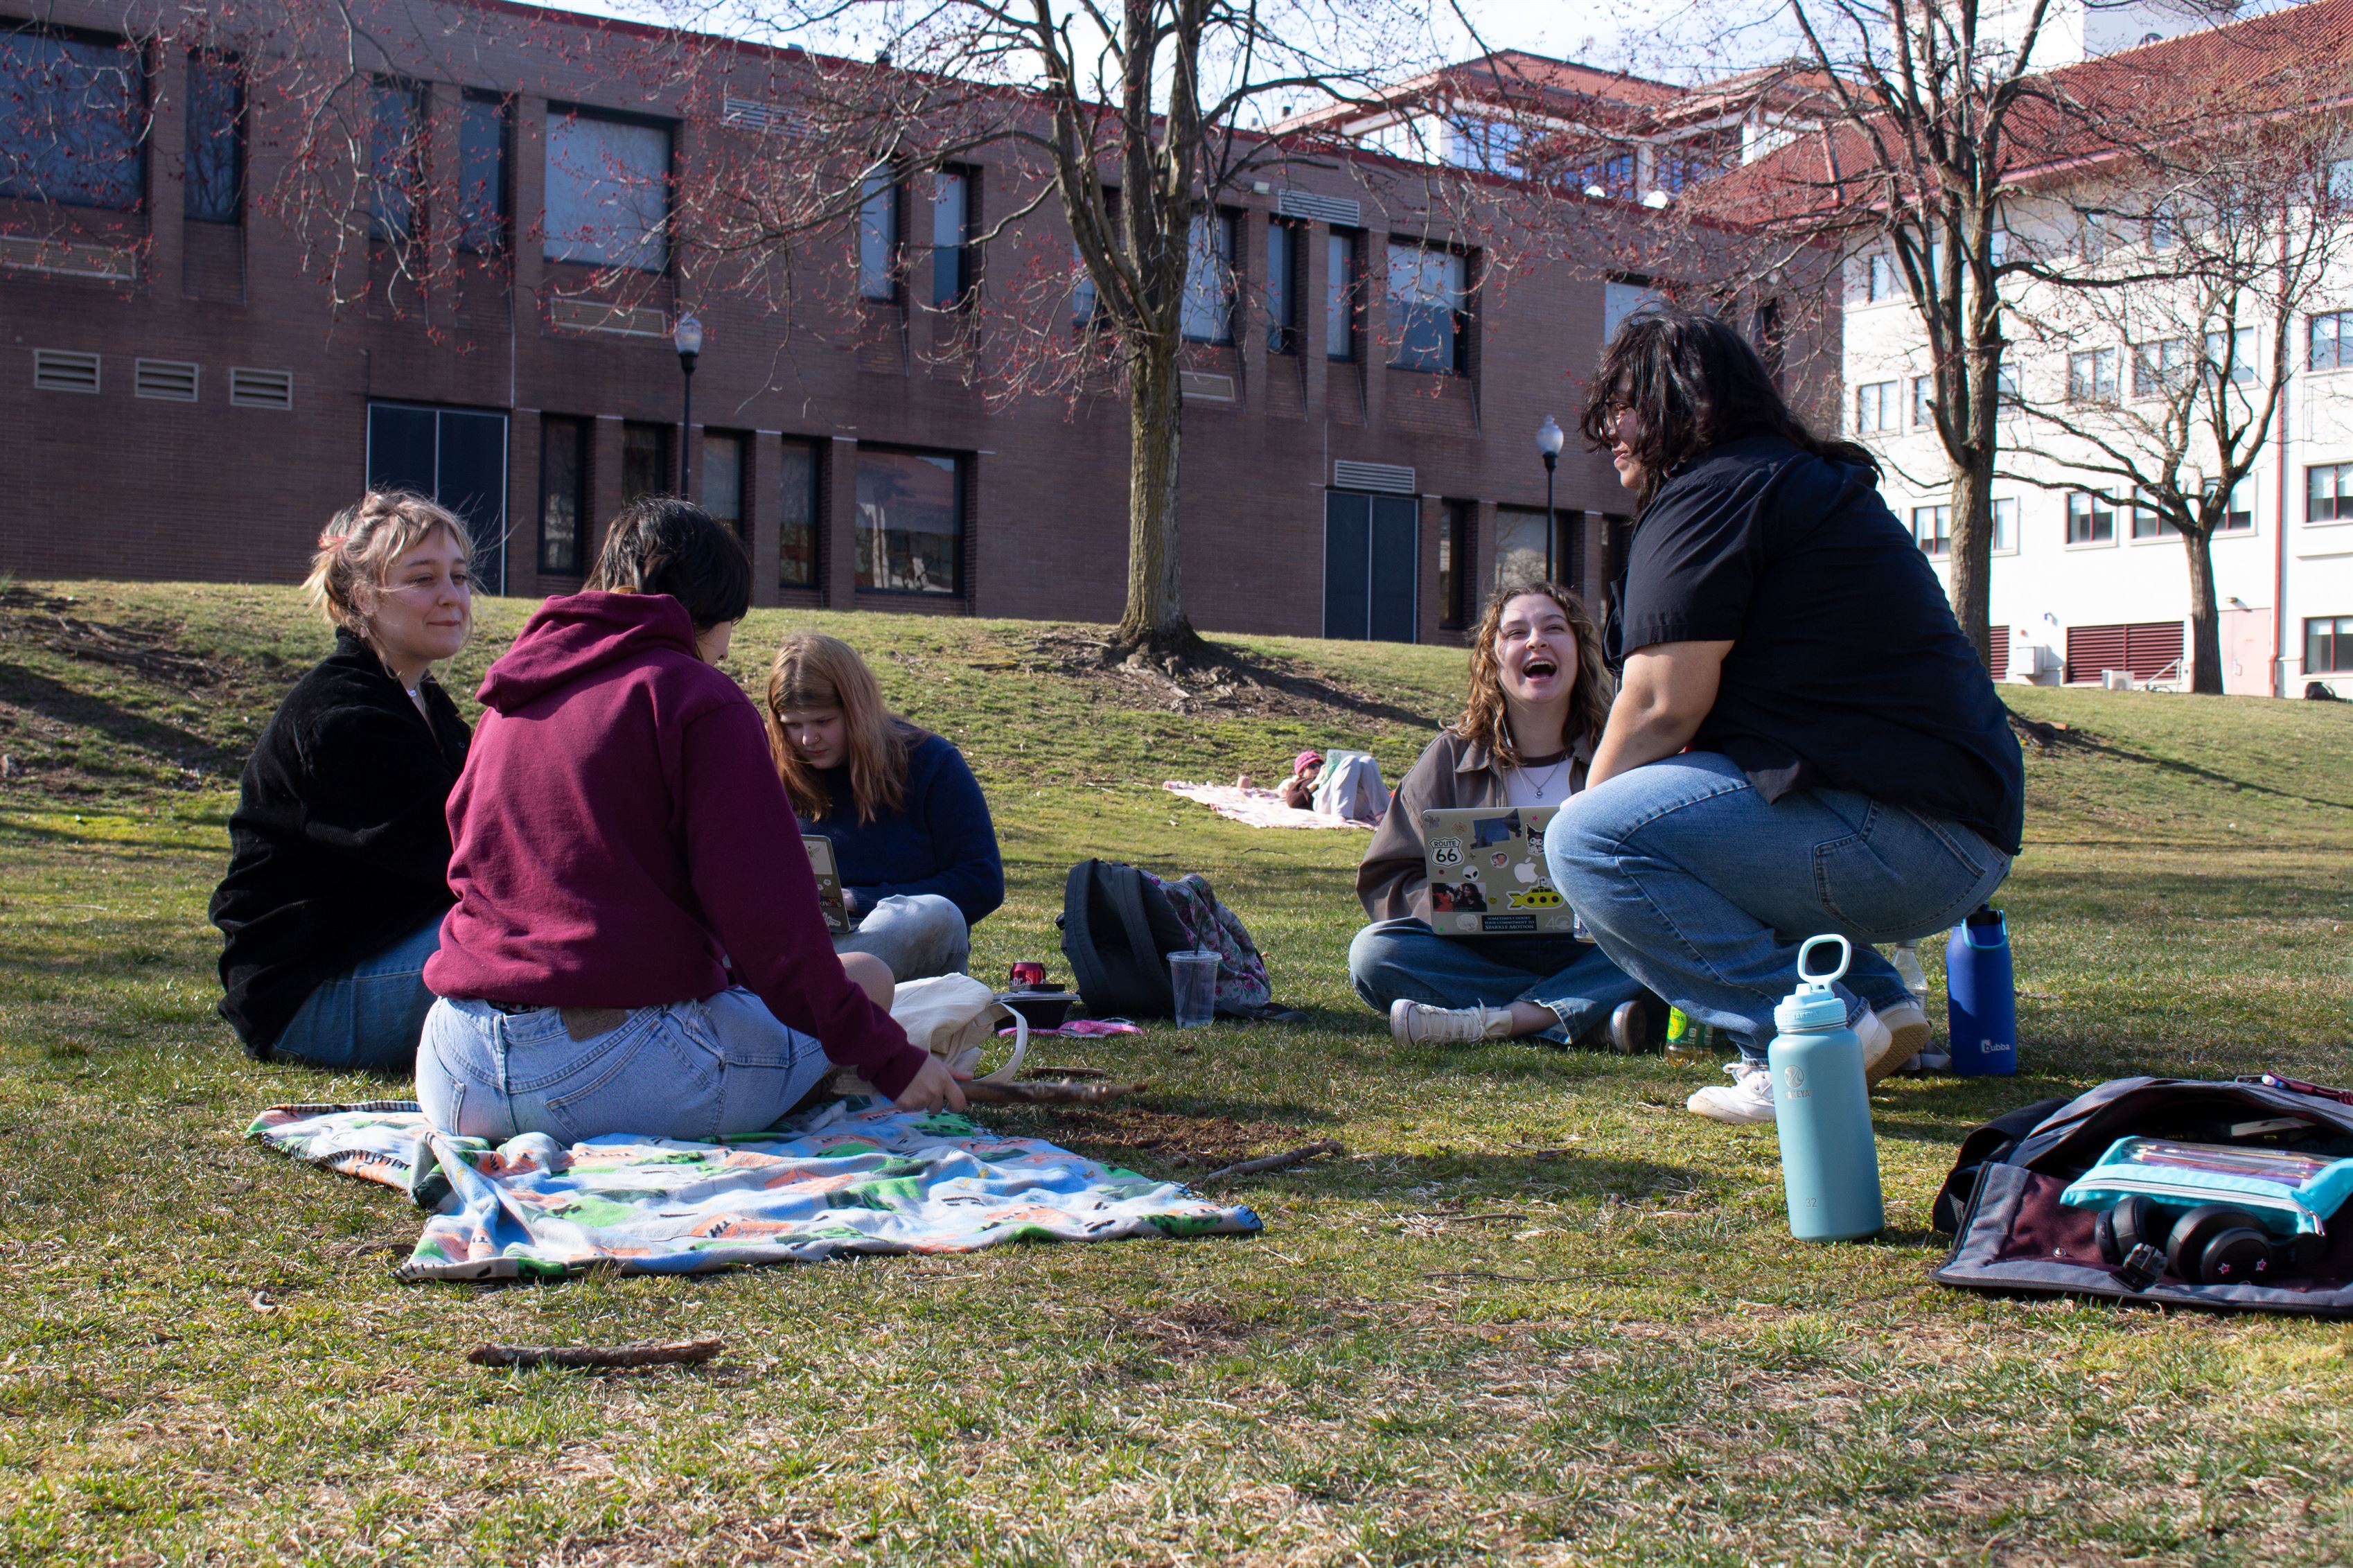 Students spending time with each other in the Student Center Quad.
Sal DiMaggio | The Montclarion